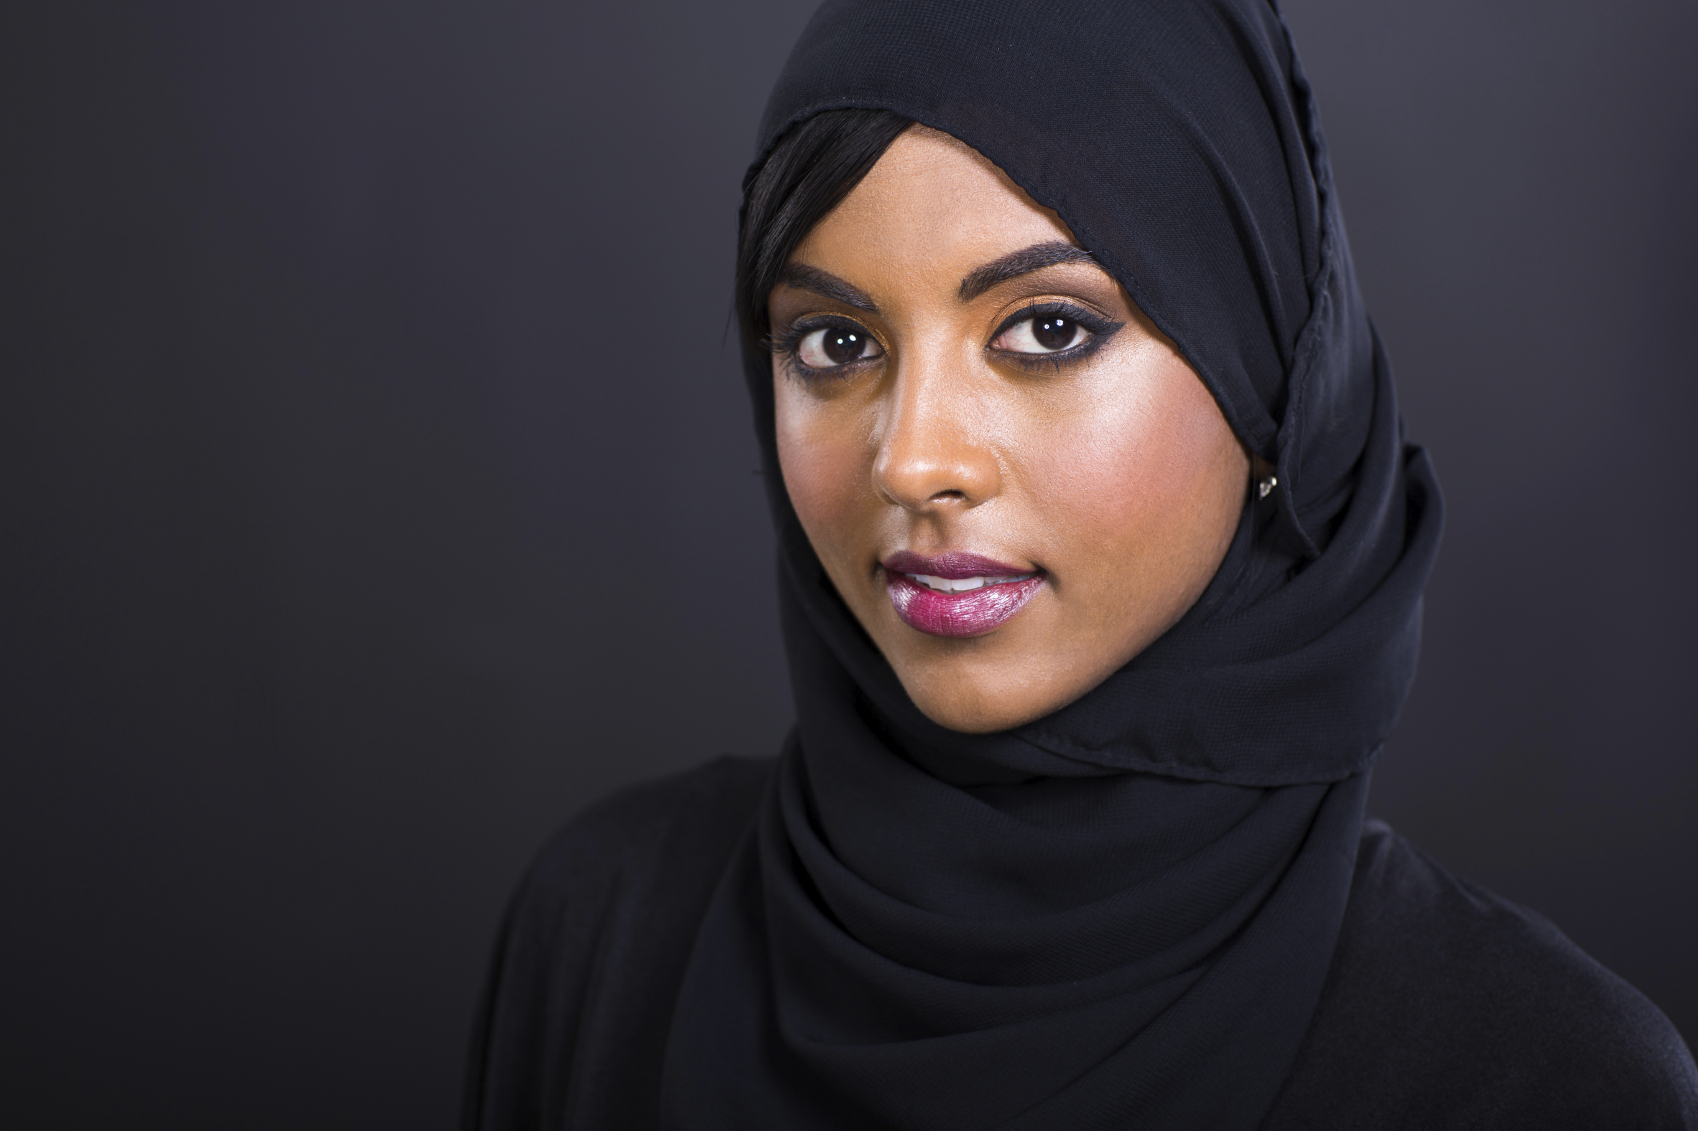 pretty young muslim woman head shot over black background